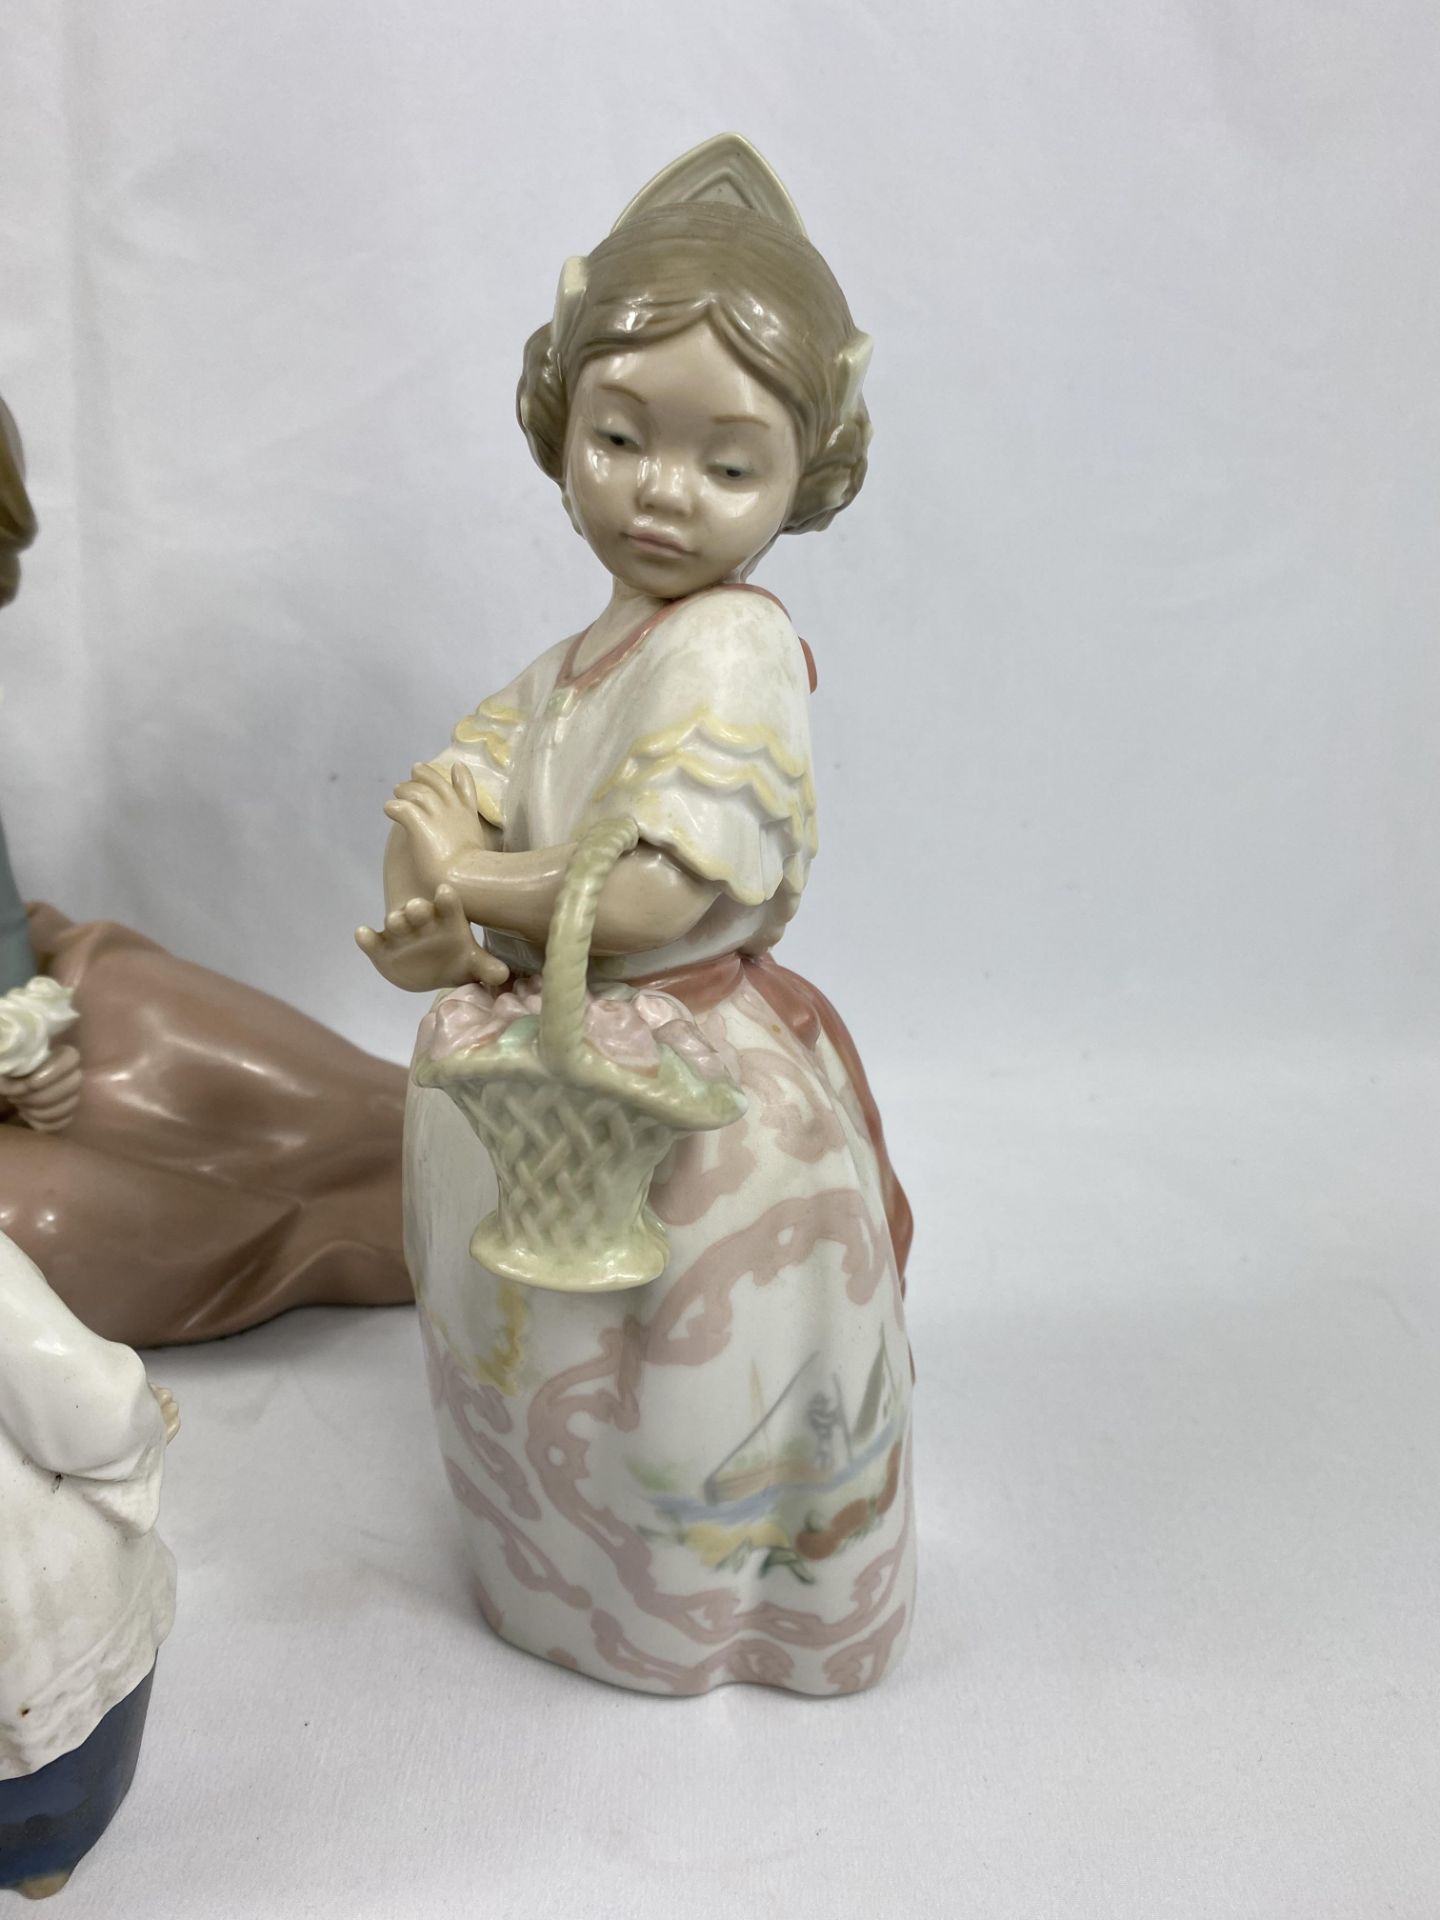 Three nao figurines, a Lladro figurine and one other - Image 6 of 6